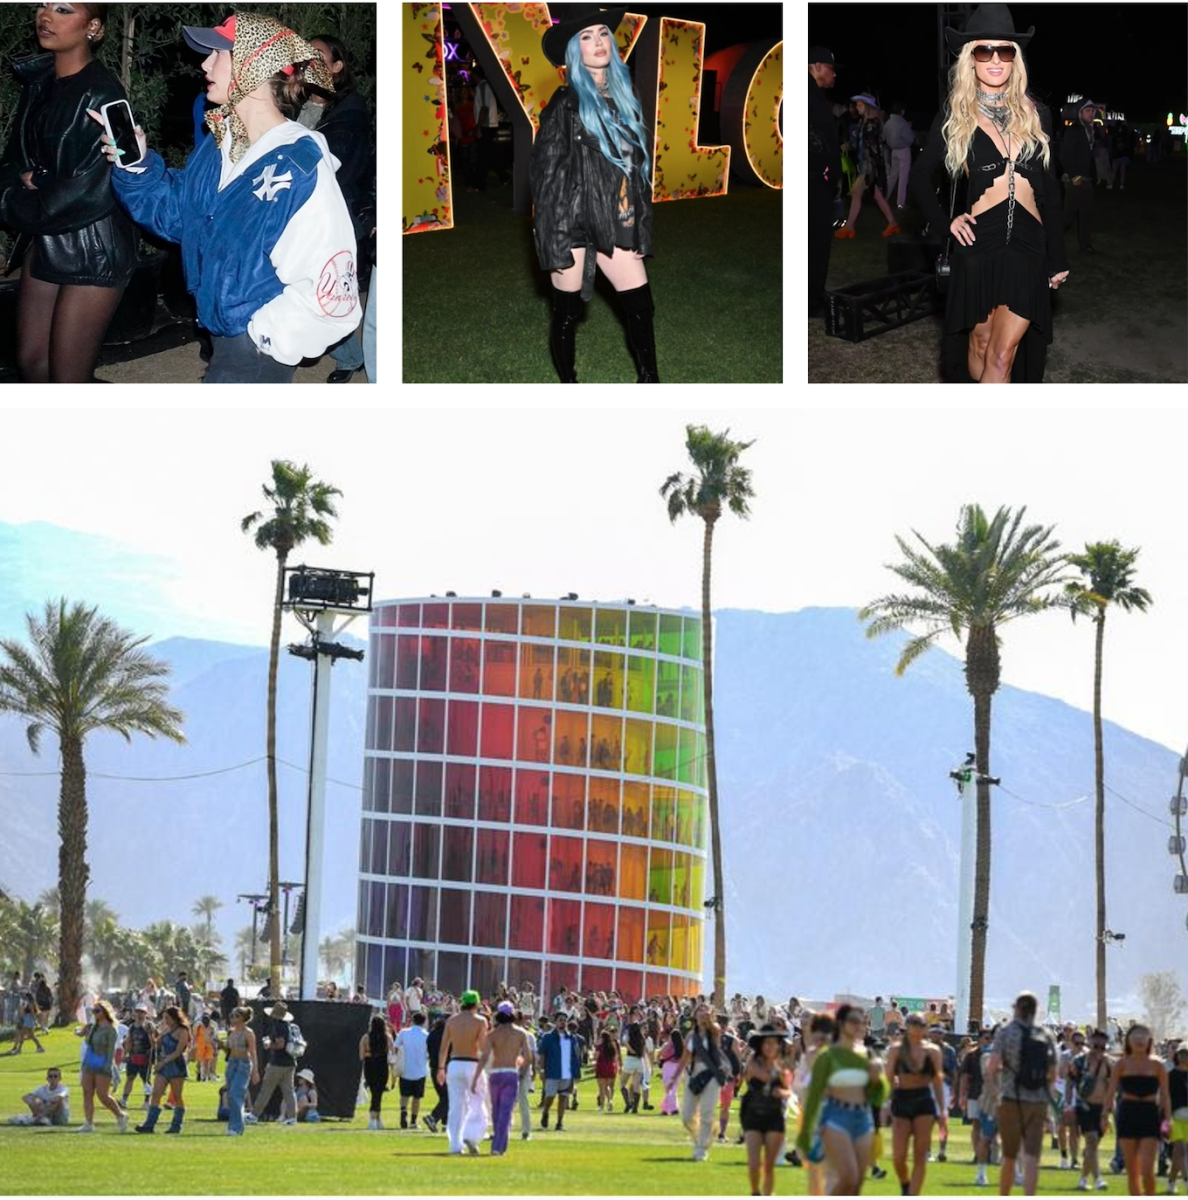 Coachella and some outfits worn placed above